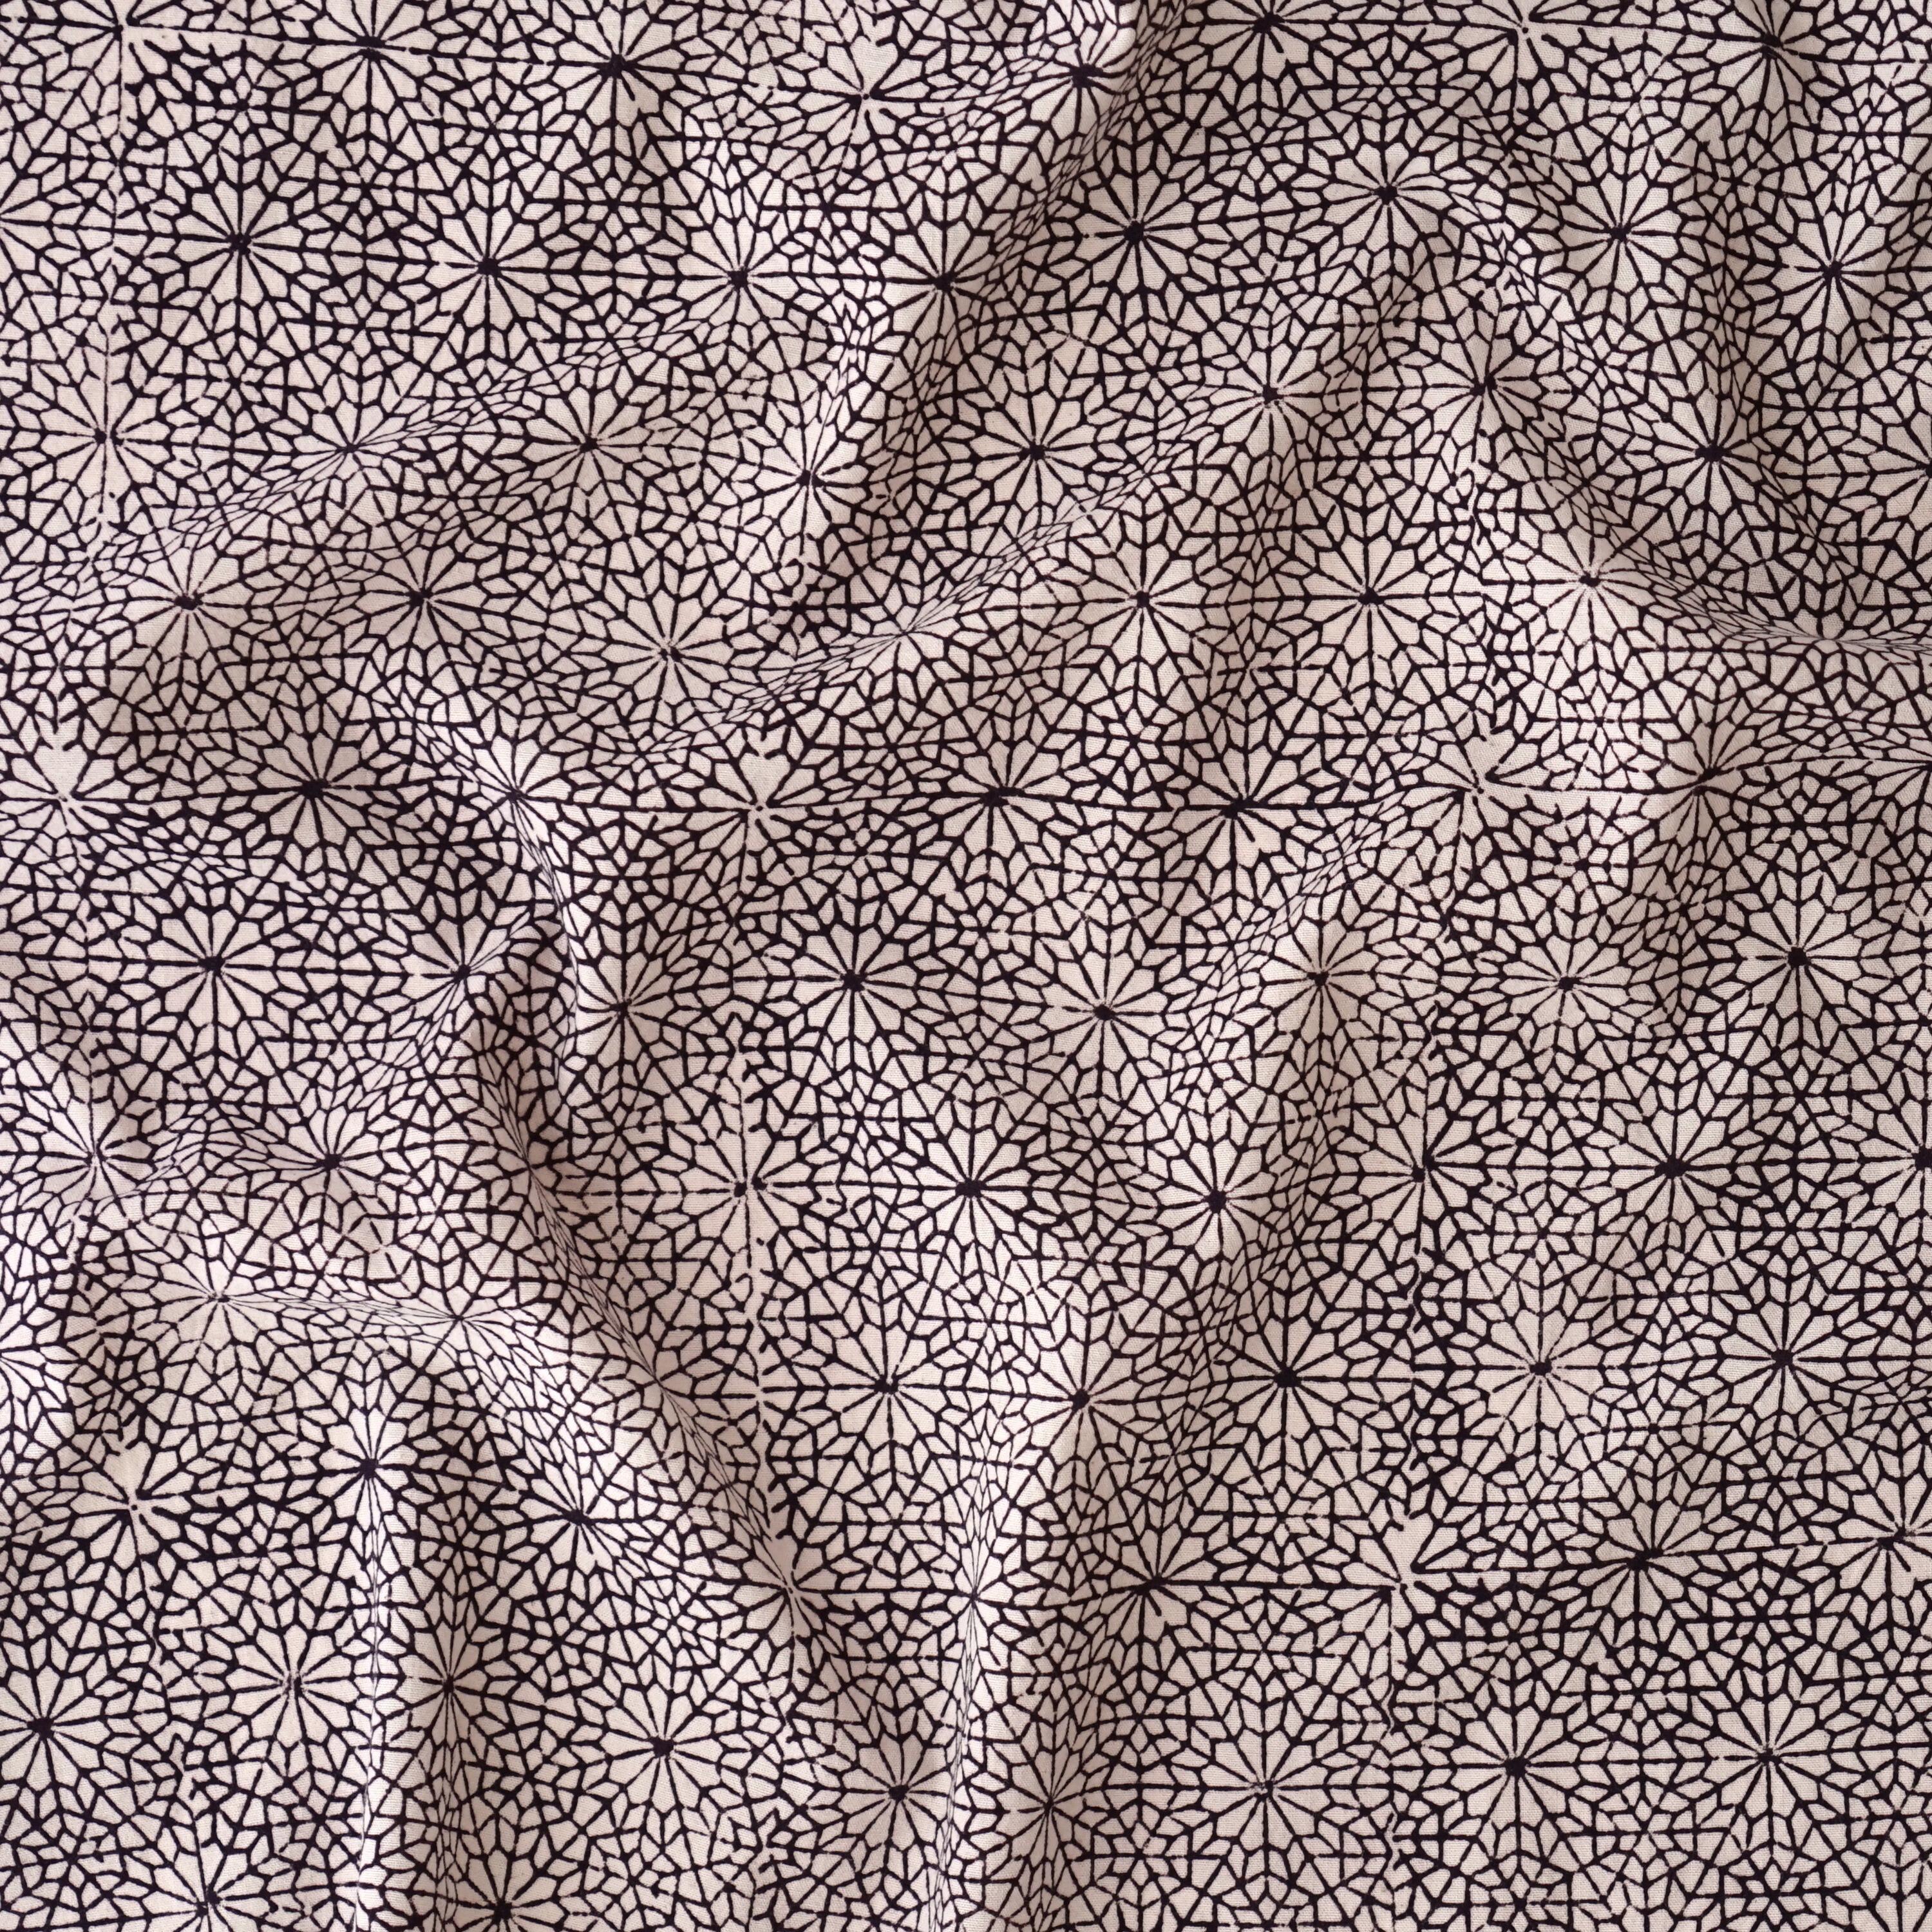 100% Block-Printed Cotton Fabric From India - Bagh Printing Method - Black 6 Degrees Design - Contrast